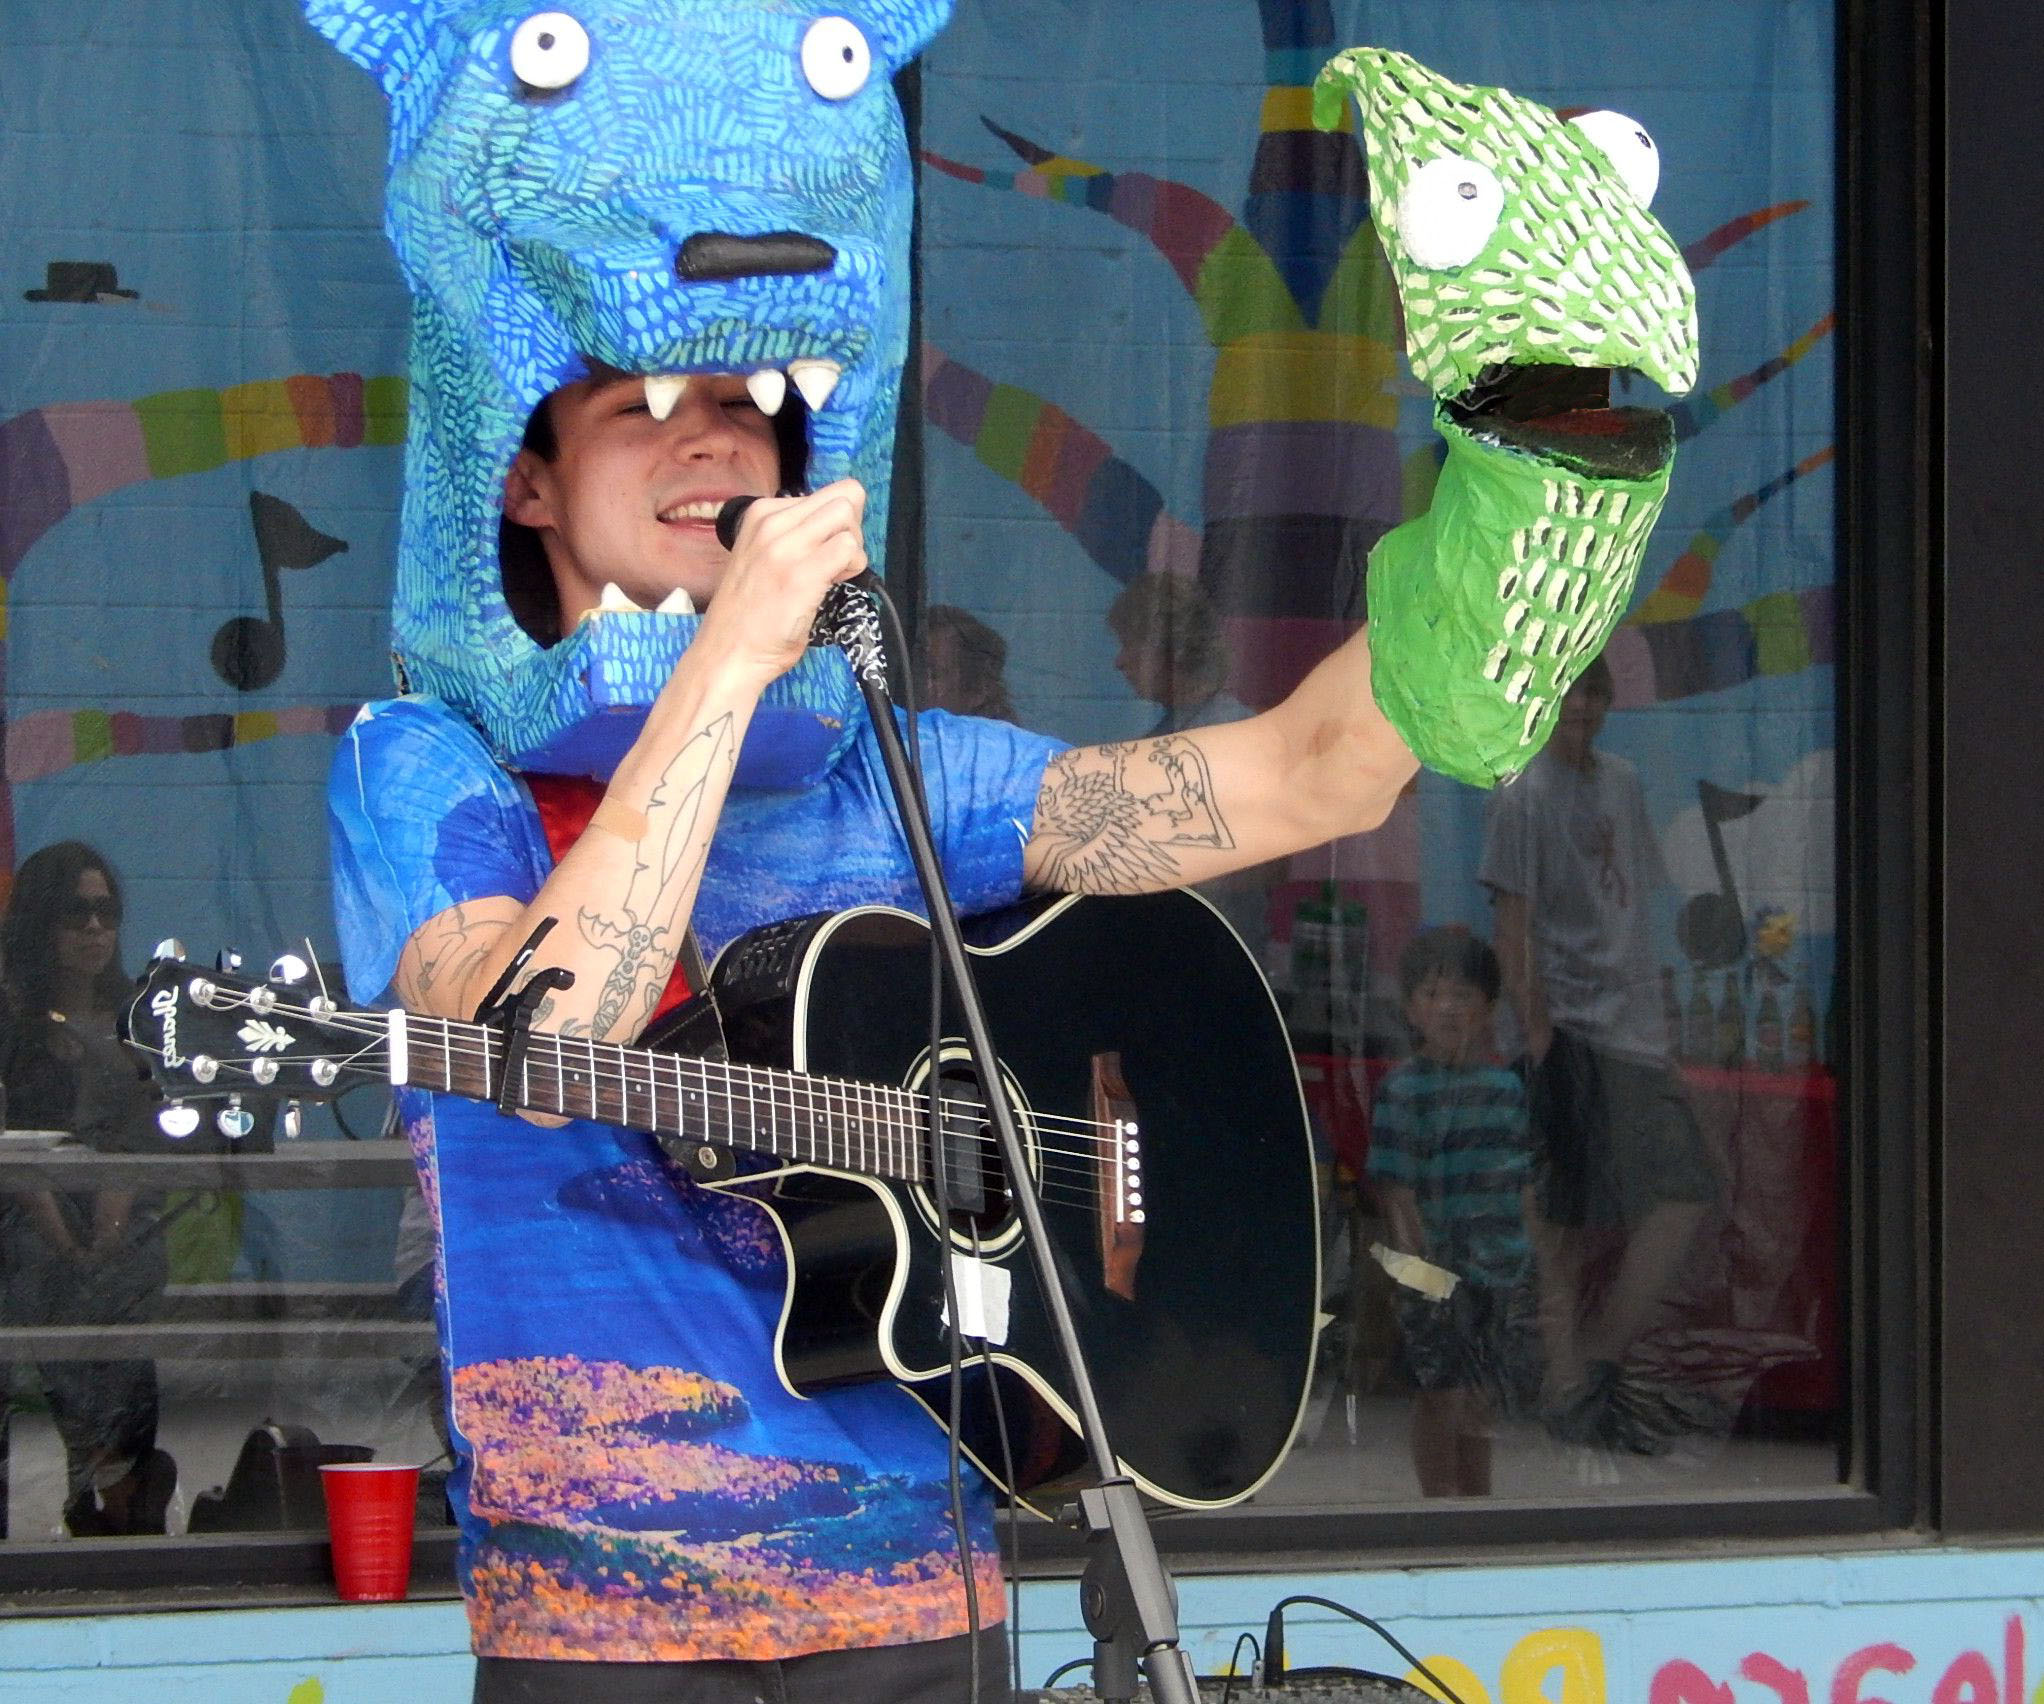 kevin sherry with puppets and guitar